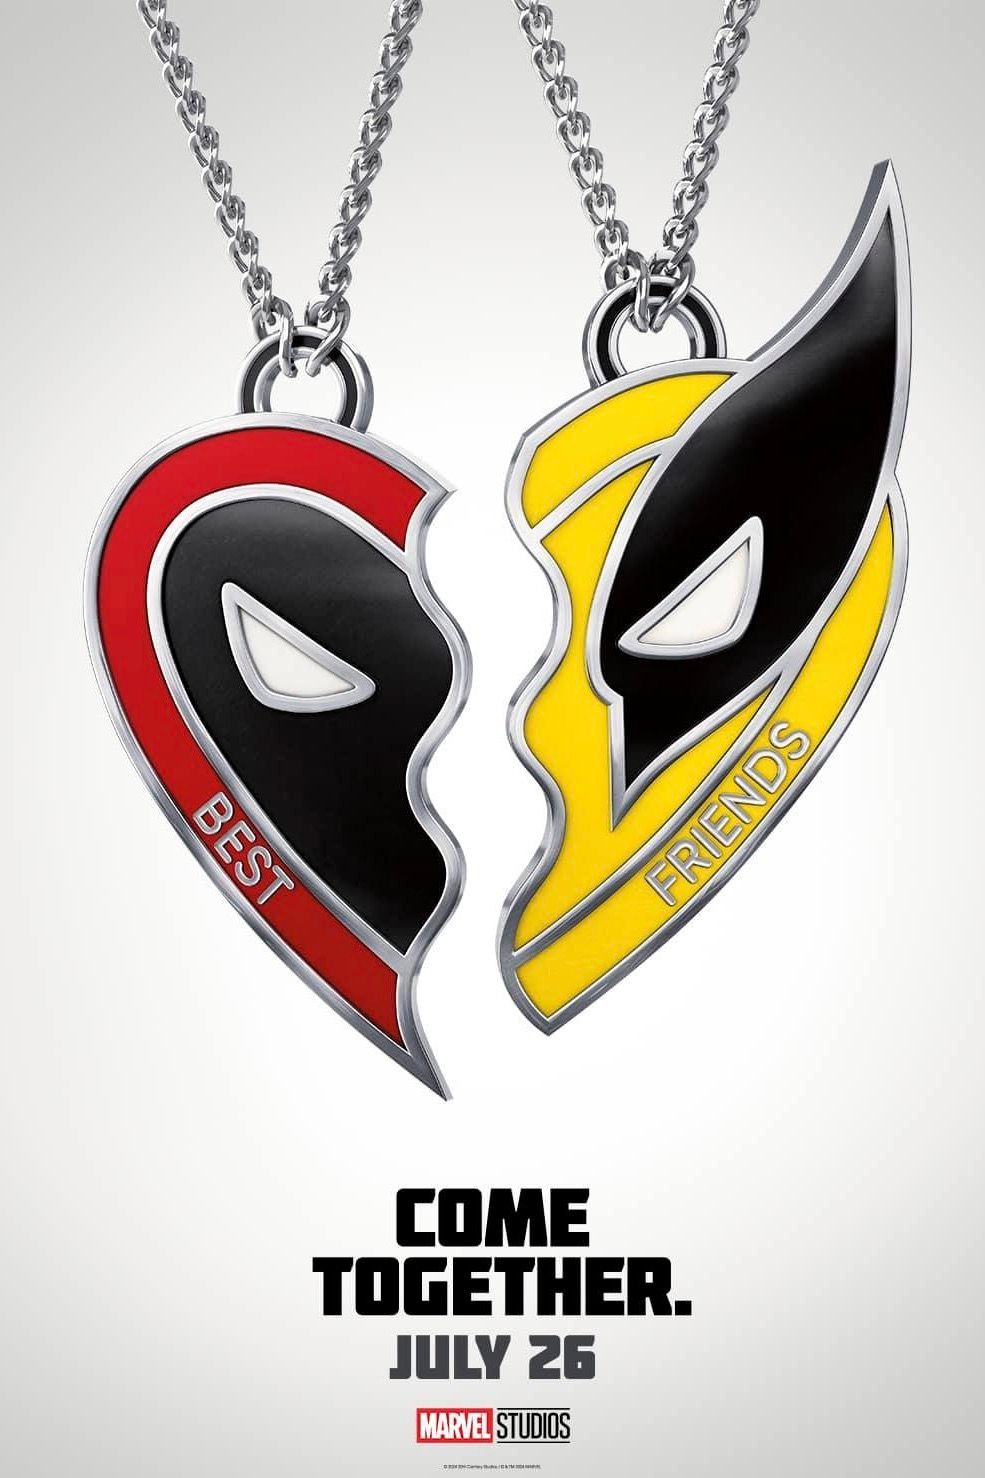 Deadpool 3 Poster Showing Two Halves of a Heart Necklace with Wolverine and Deadpool